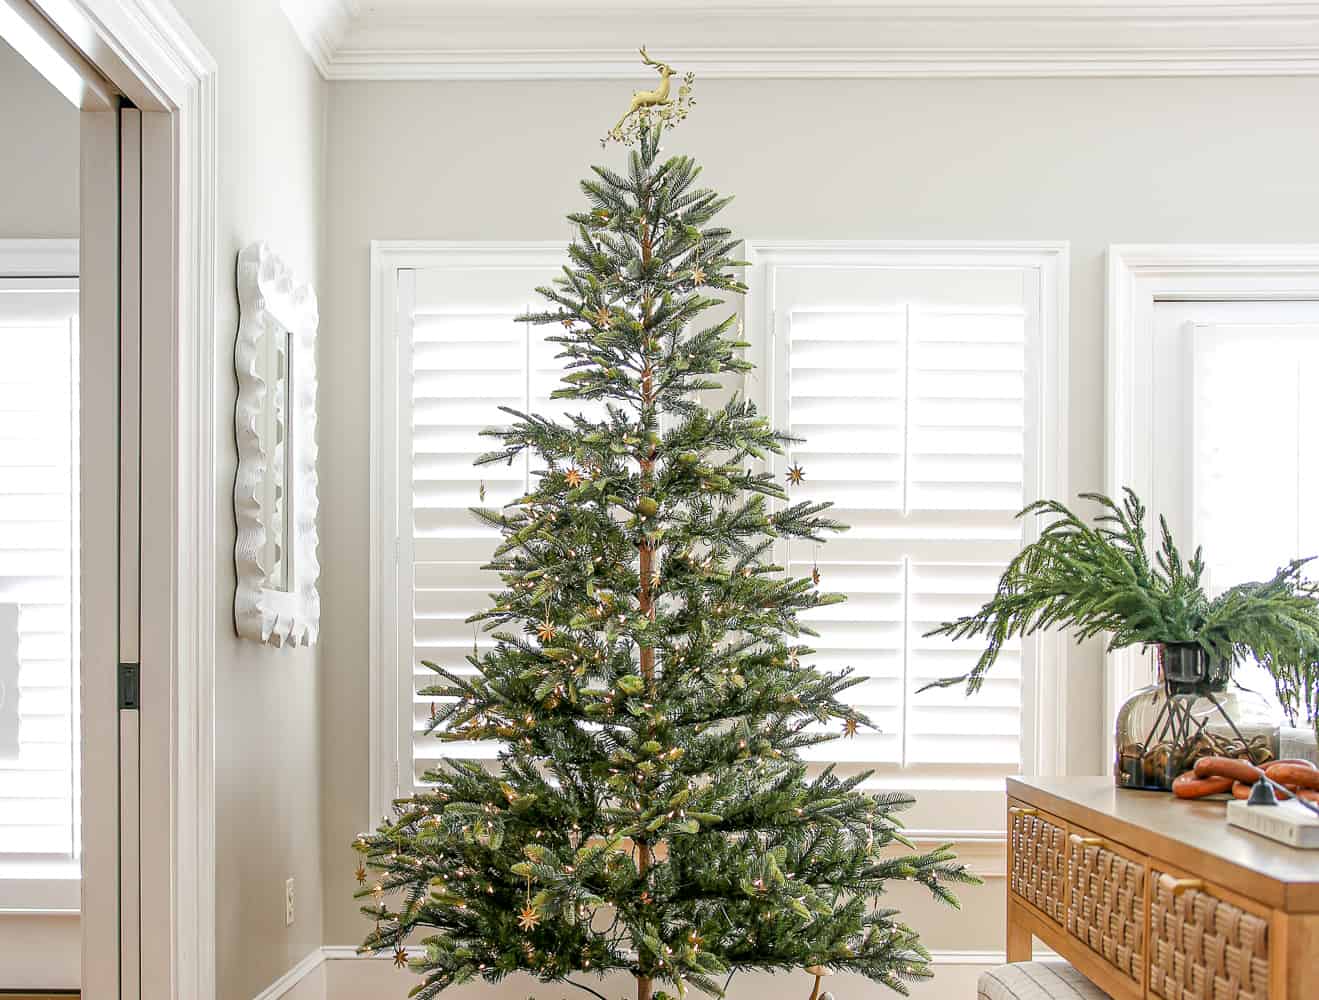 Sparse artificial tree in corner of living room with agreeable gray walls and interior window shutters, console table styled with Norfolk pine stems in a vase